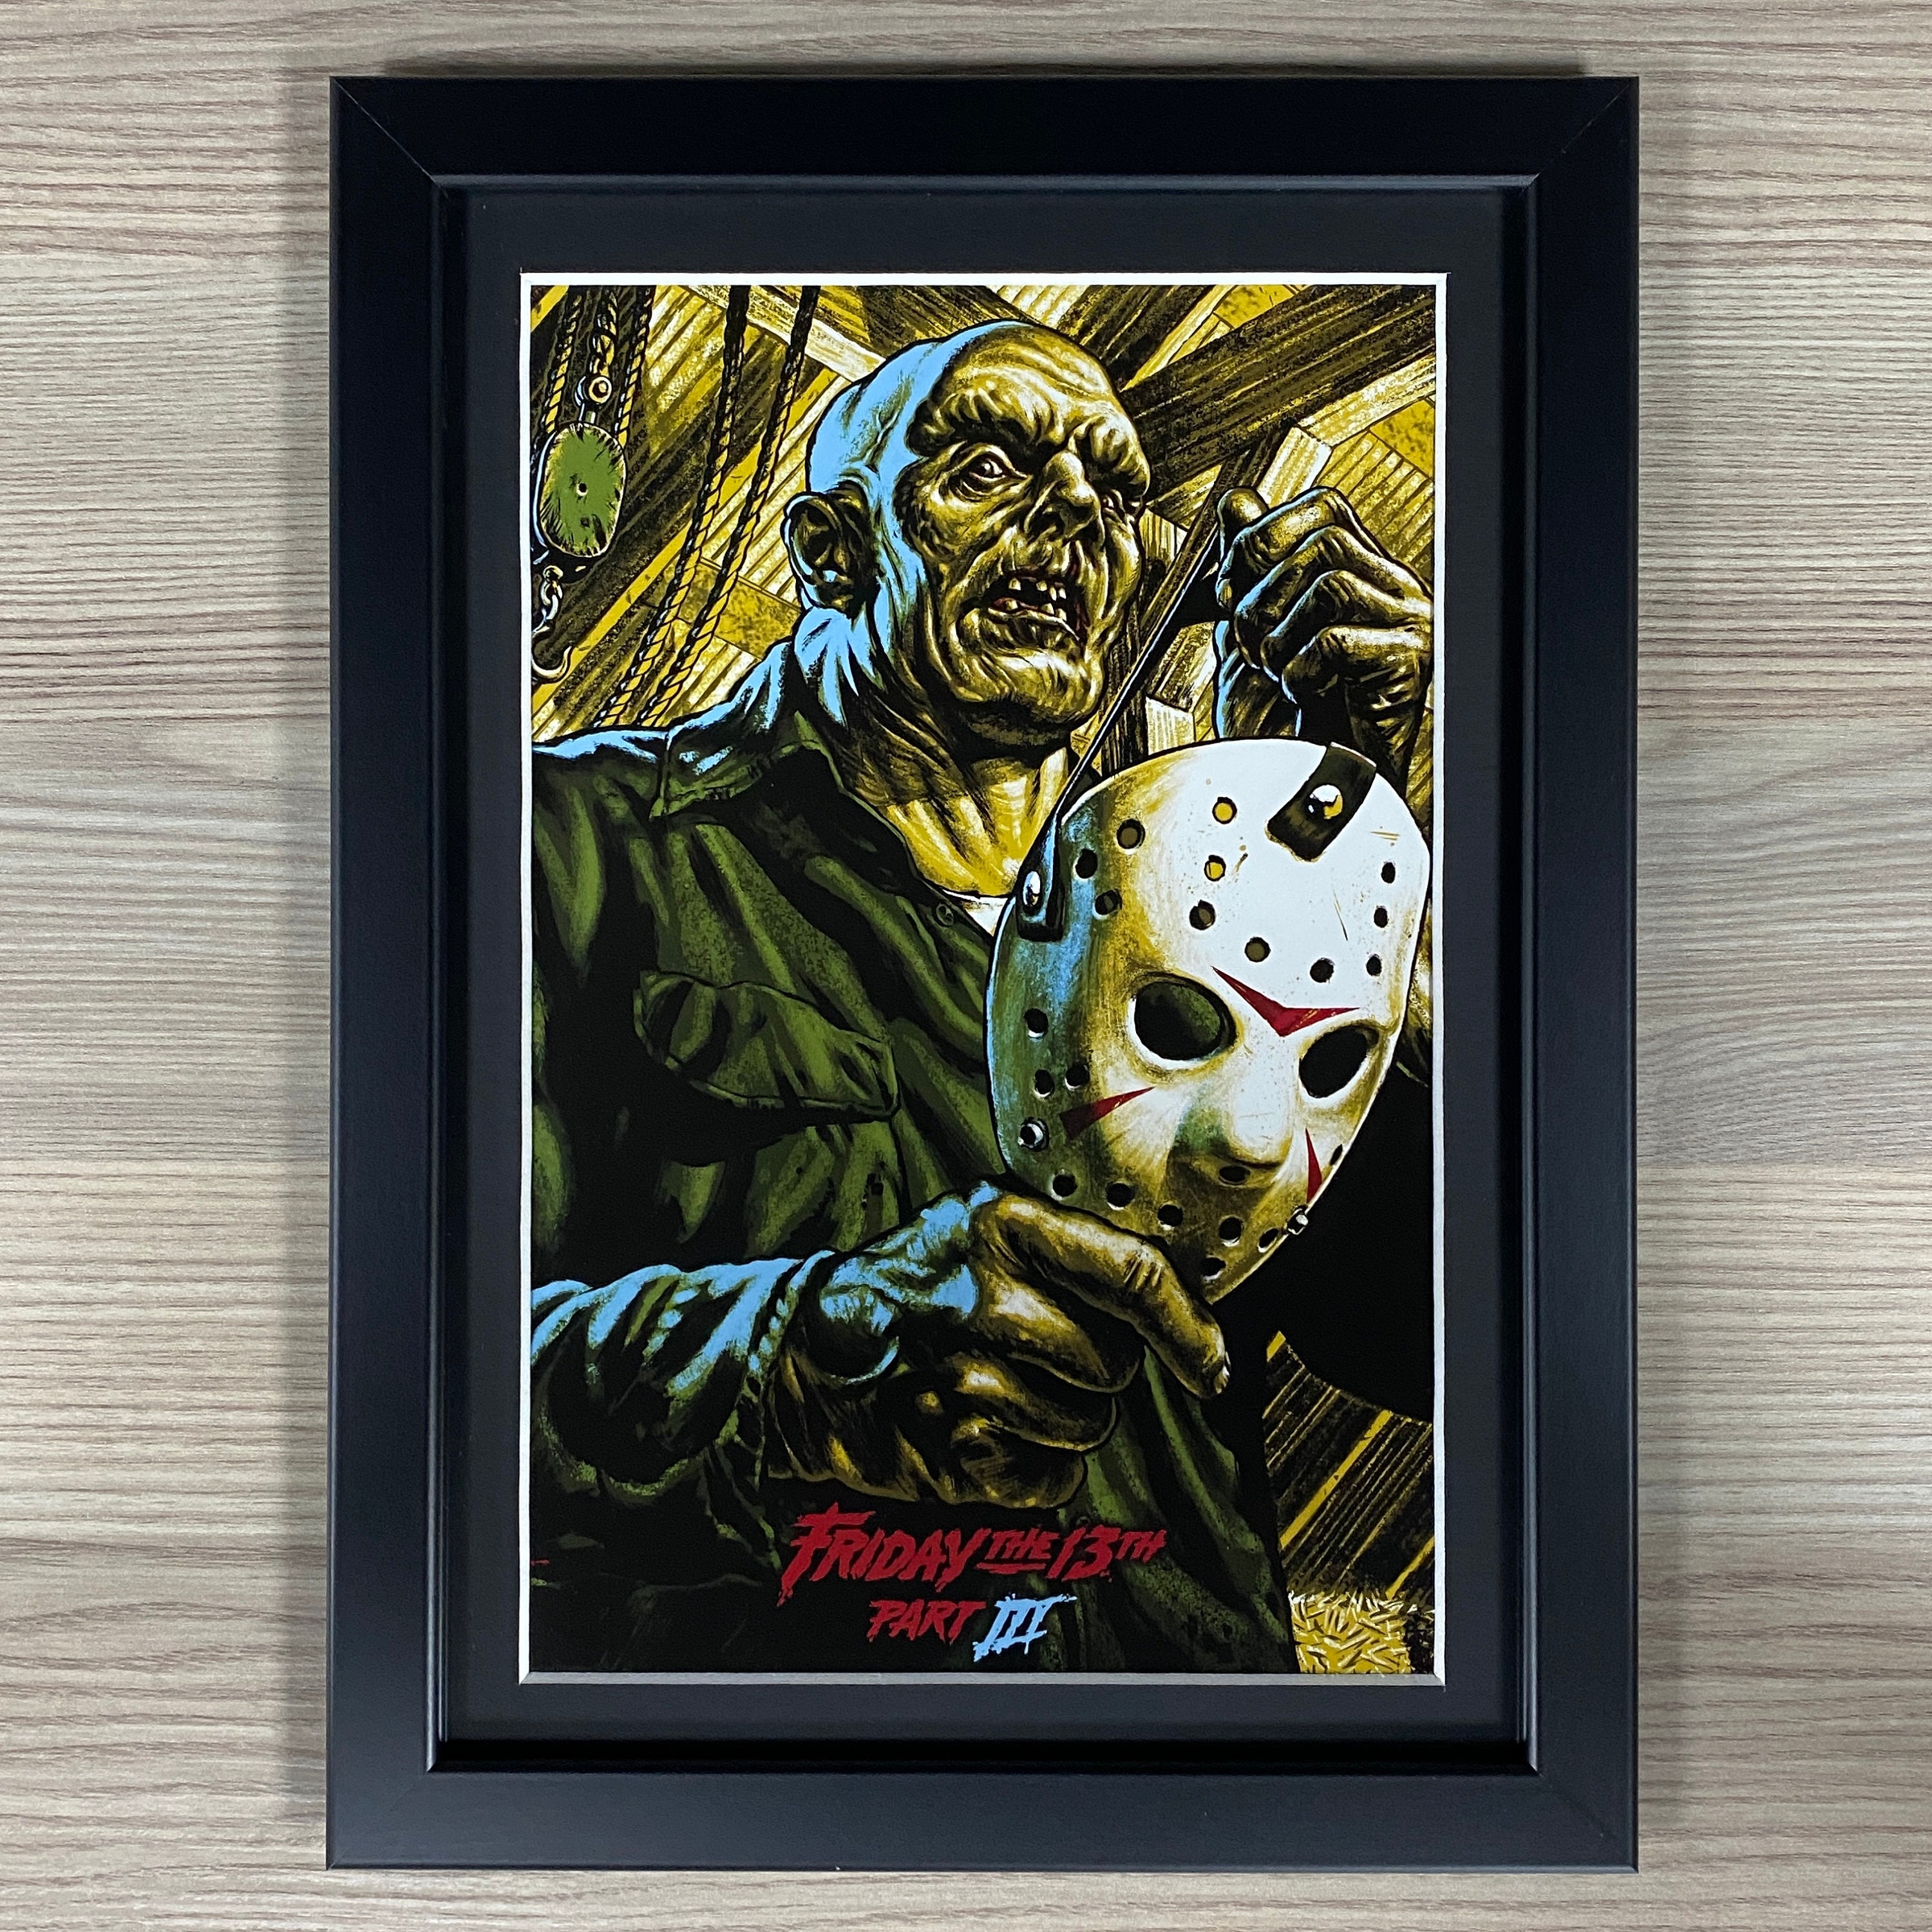 Friday The 13th Movie Collage Poster, Framed Art, Jason Voorhees, NEW, USA